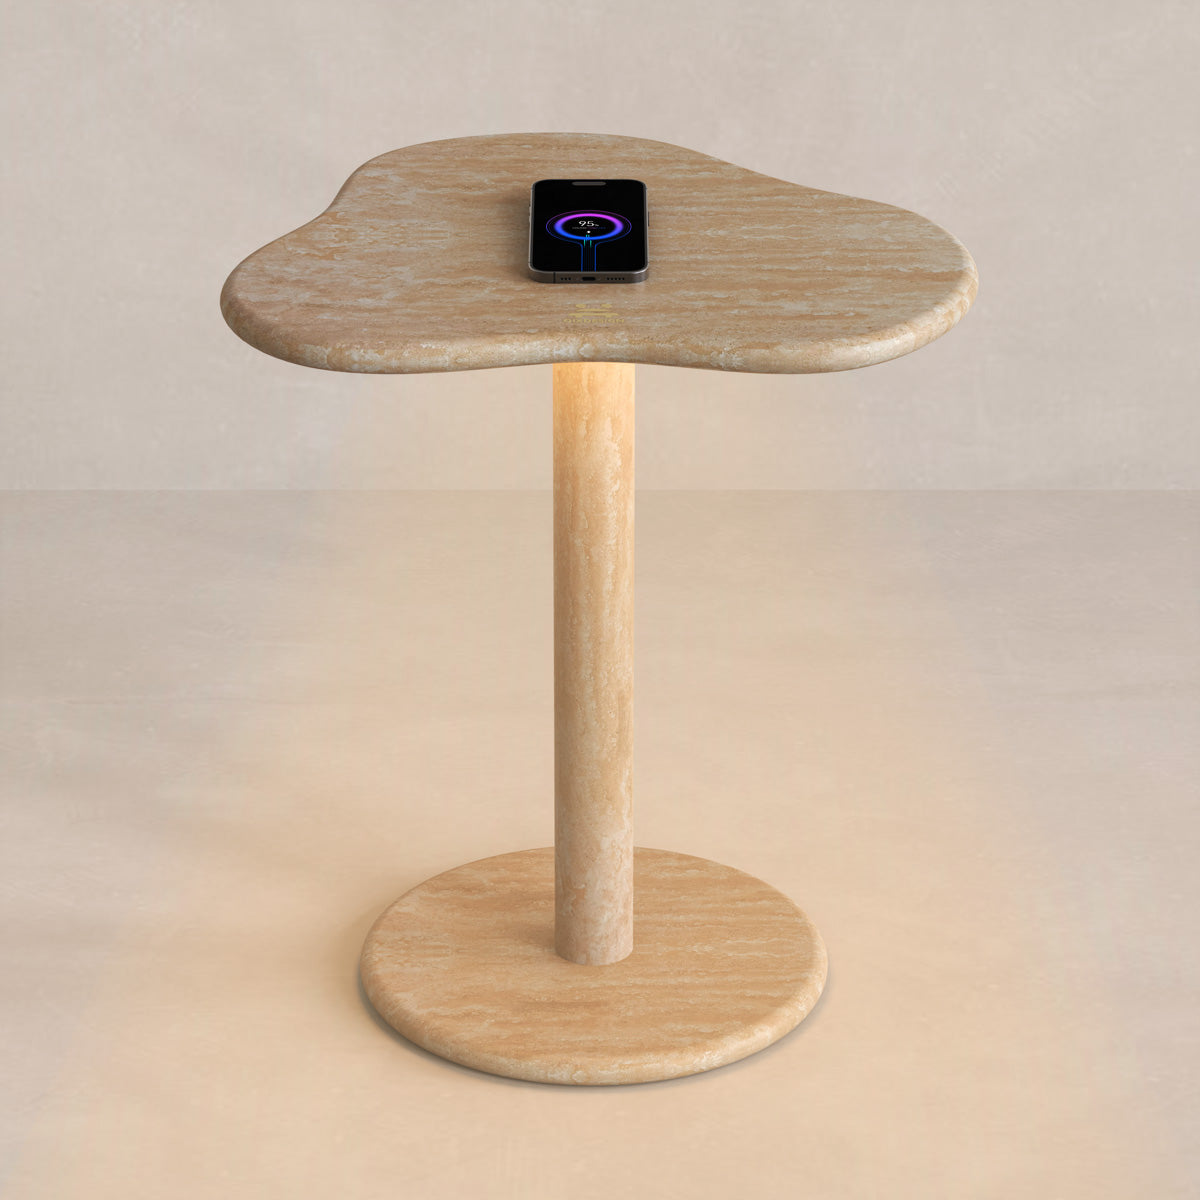 round travertine side table round marble top side table marble side table round bedside table with wireless charger